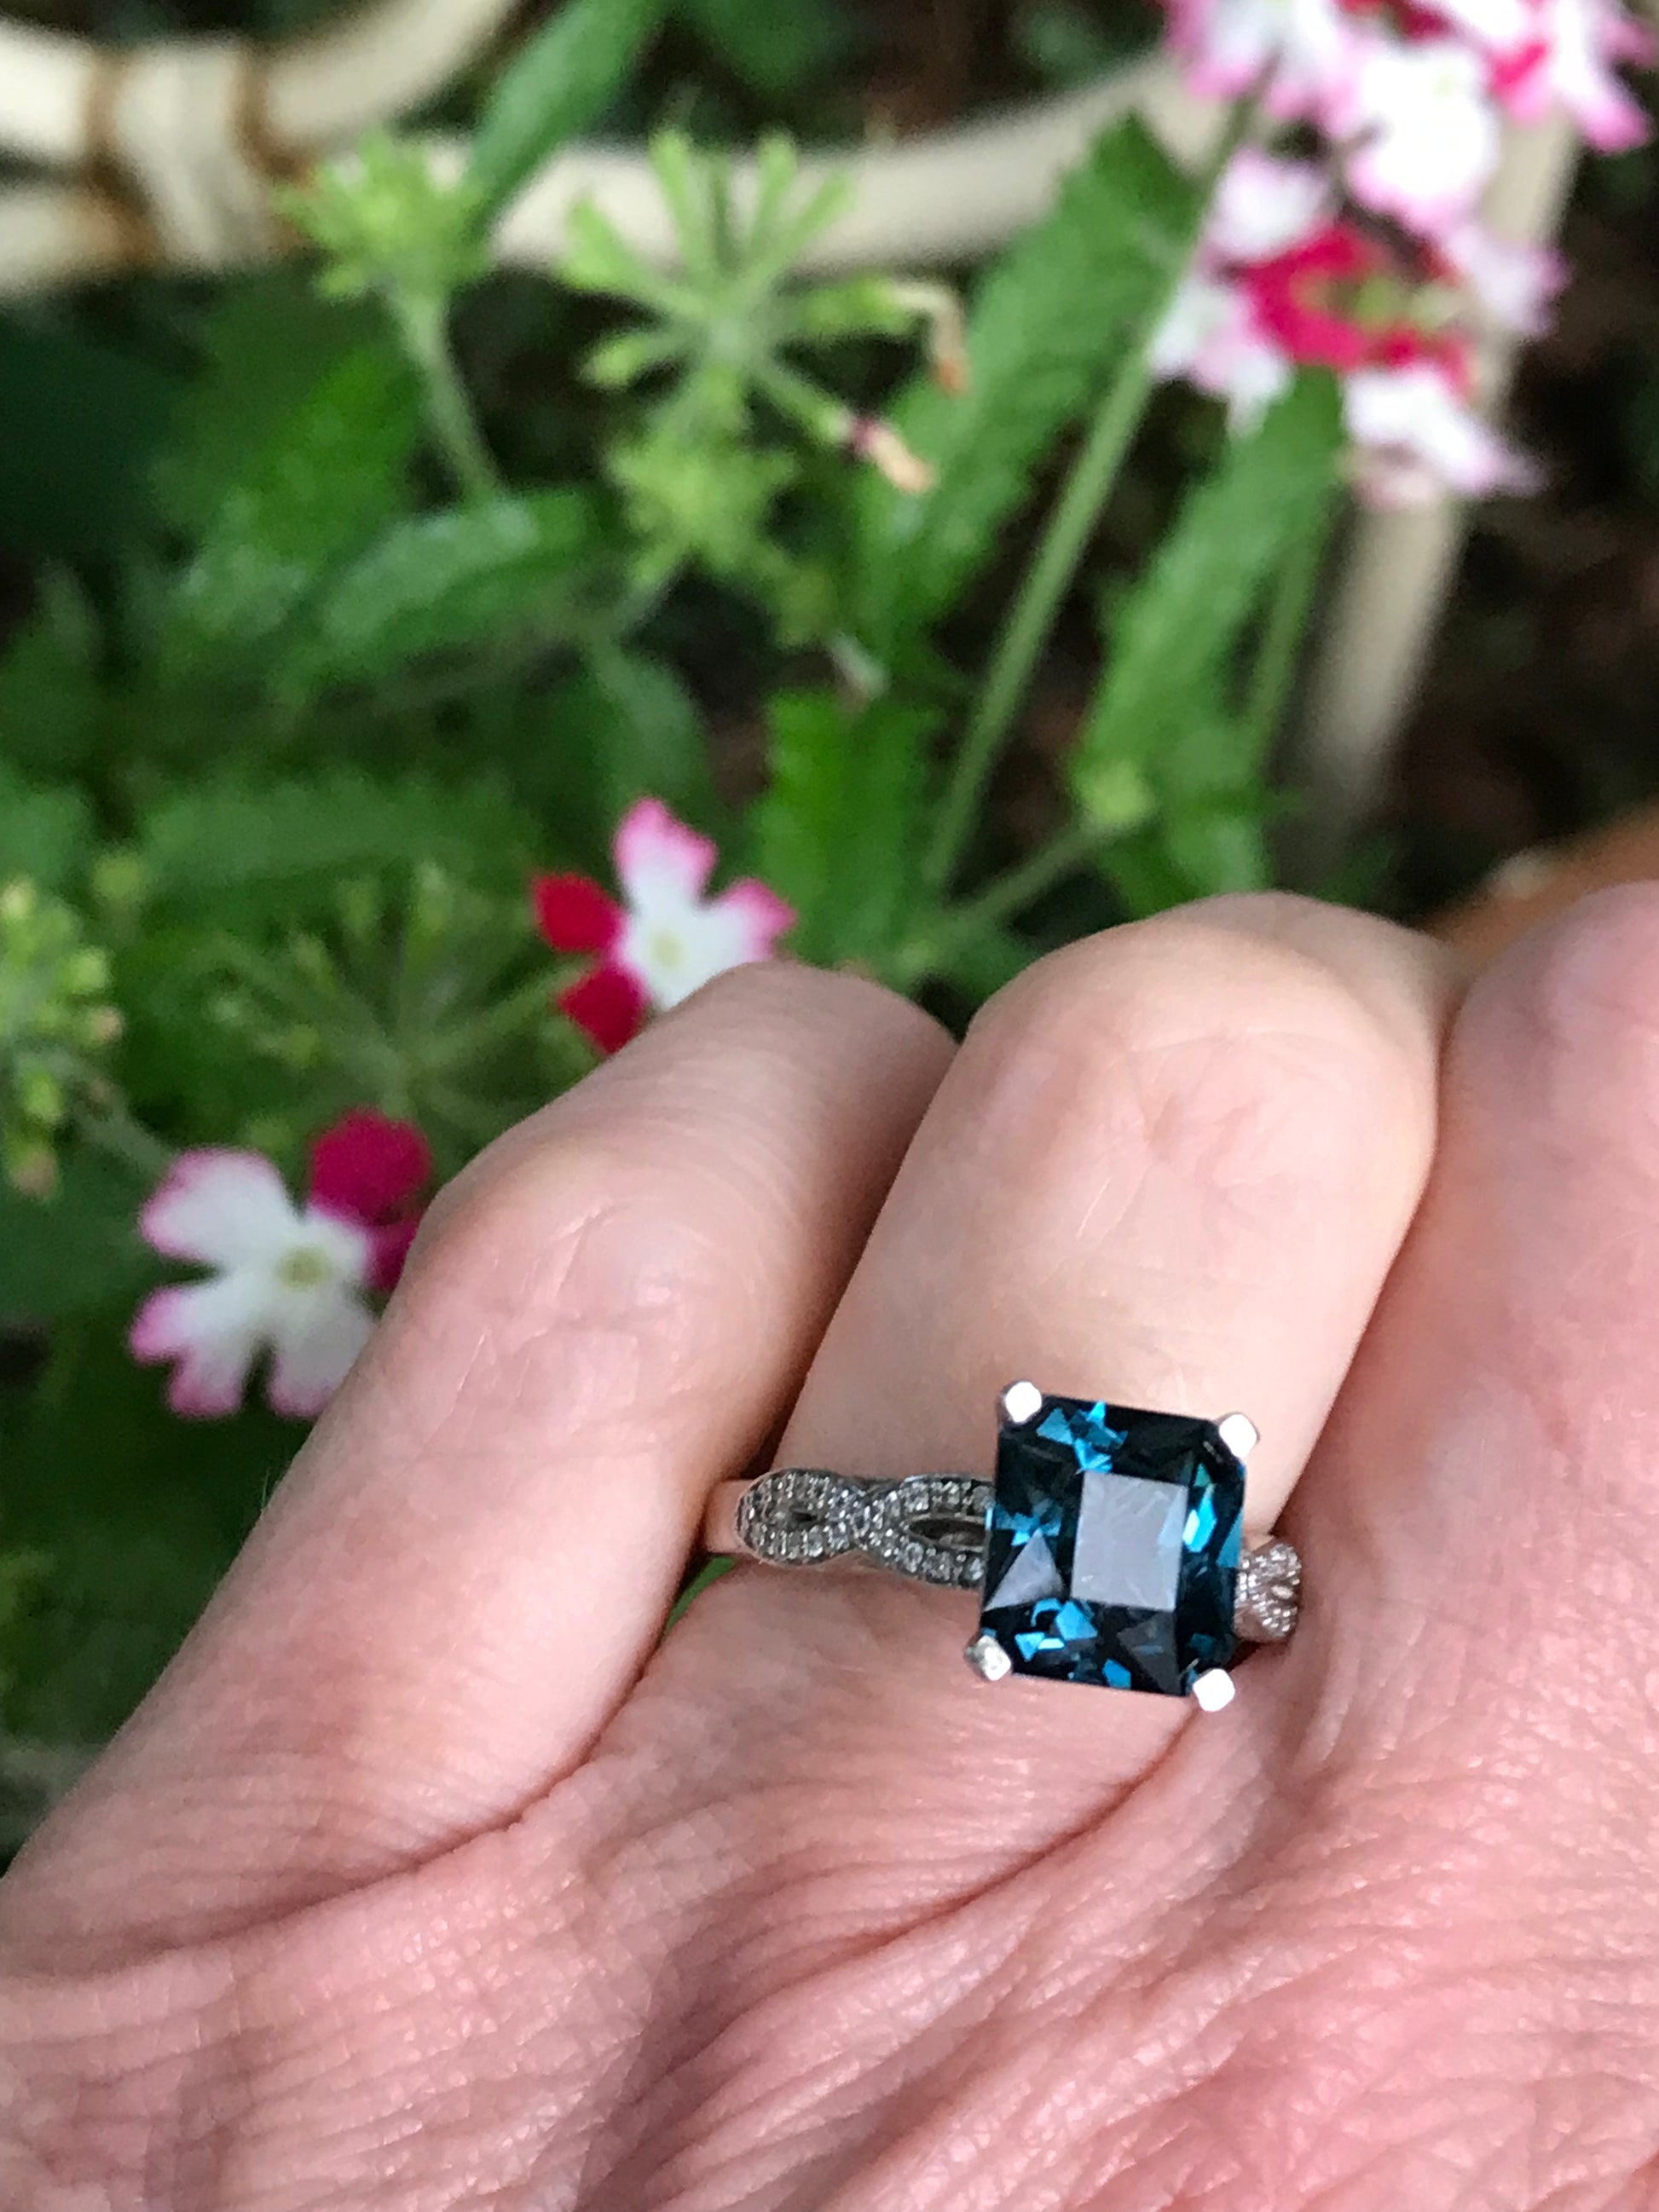 Palladium weaved shape ring set with a petrol blue spinel and diamonds Ring Rock Lobster   